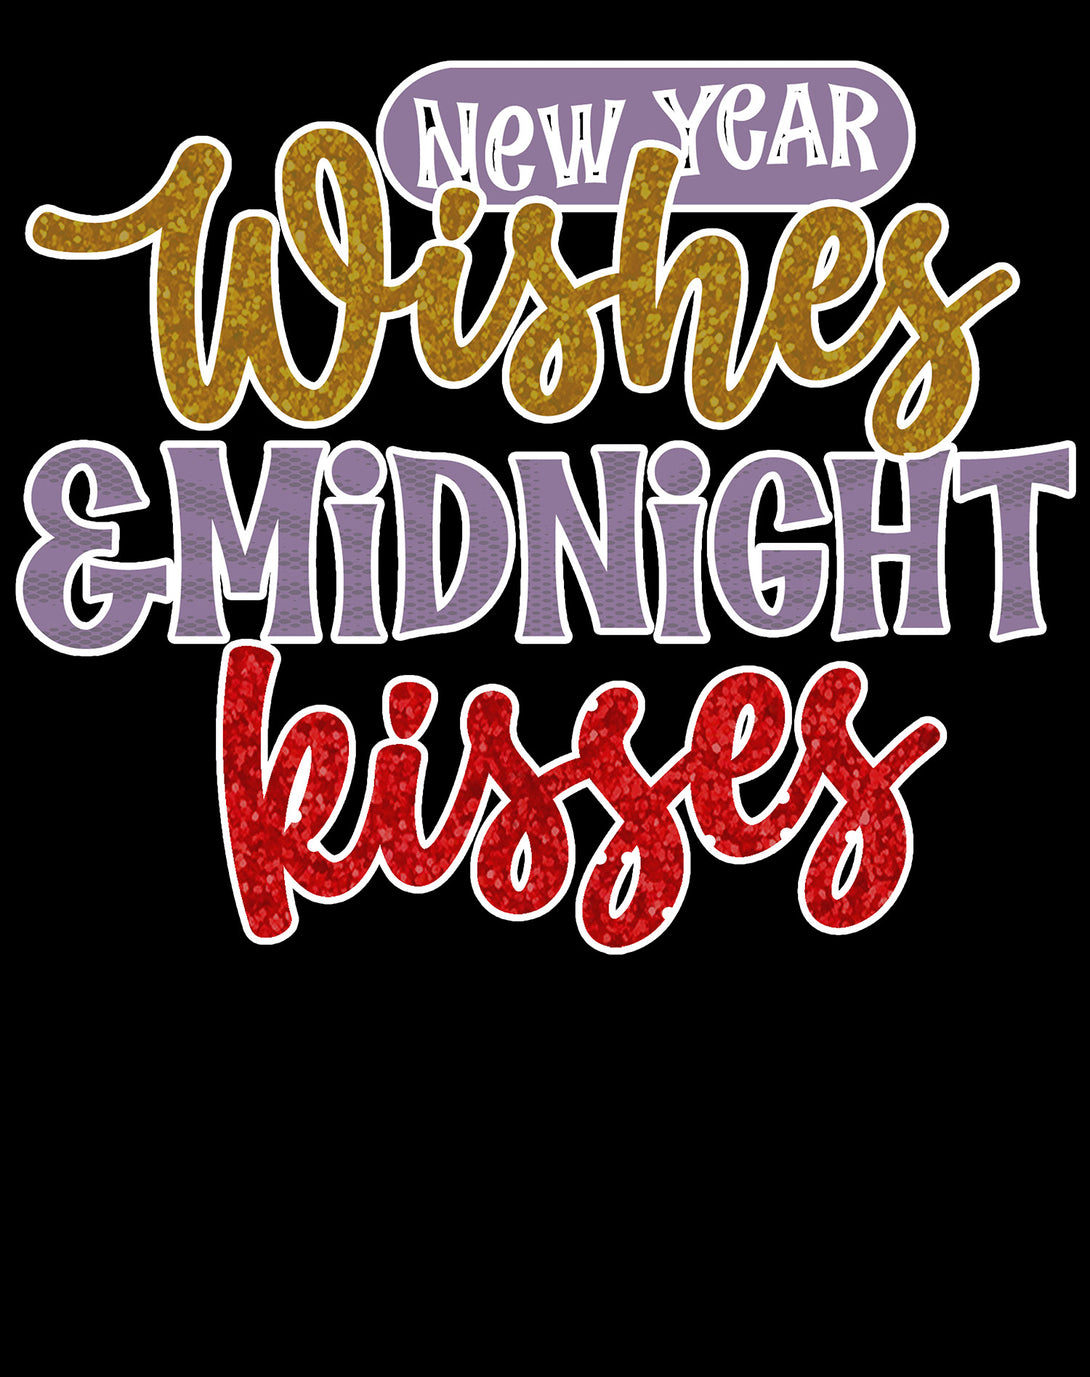 NYE New Year Wishes Midnight Kisses Eve Party Cute Couples Men's T-Shirt Black - Urban Species Design Close Up